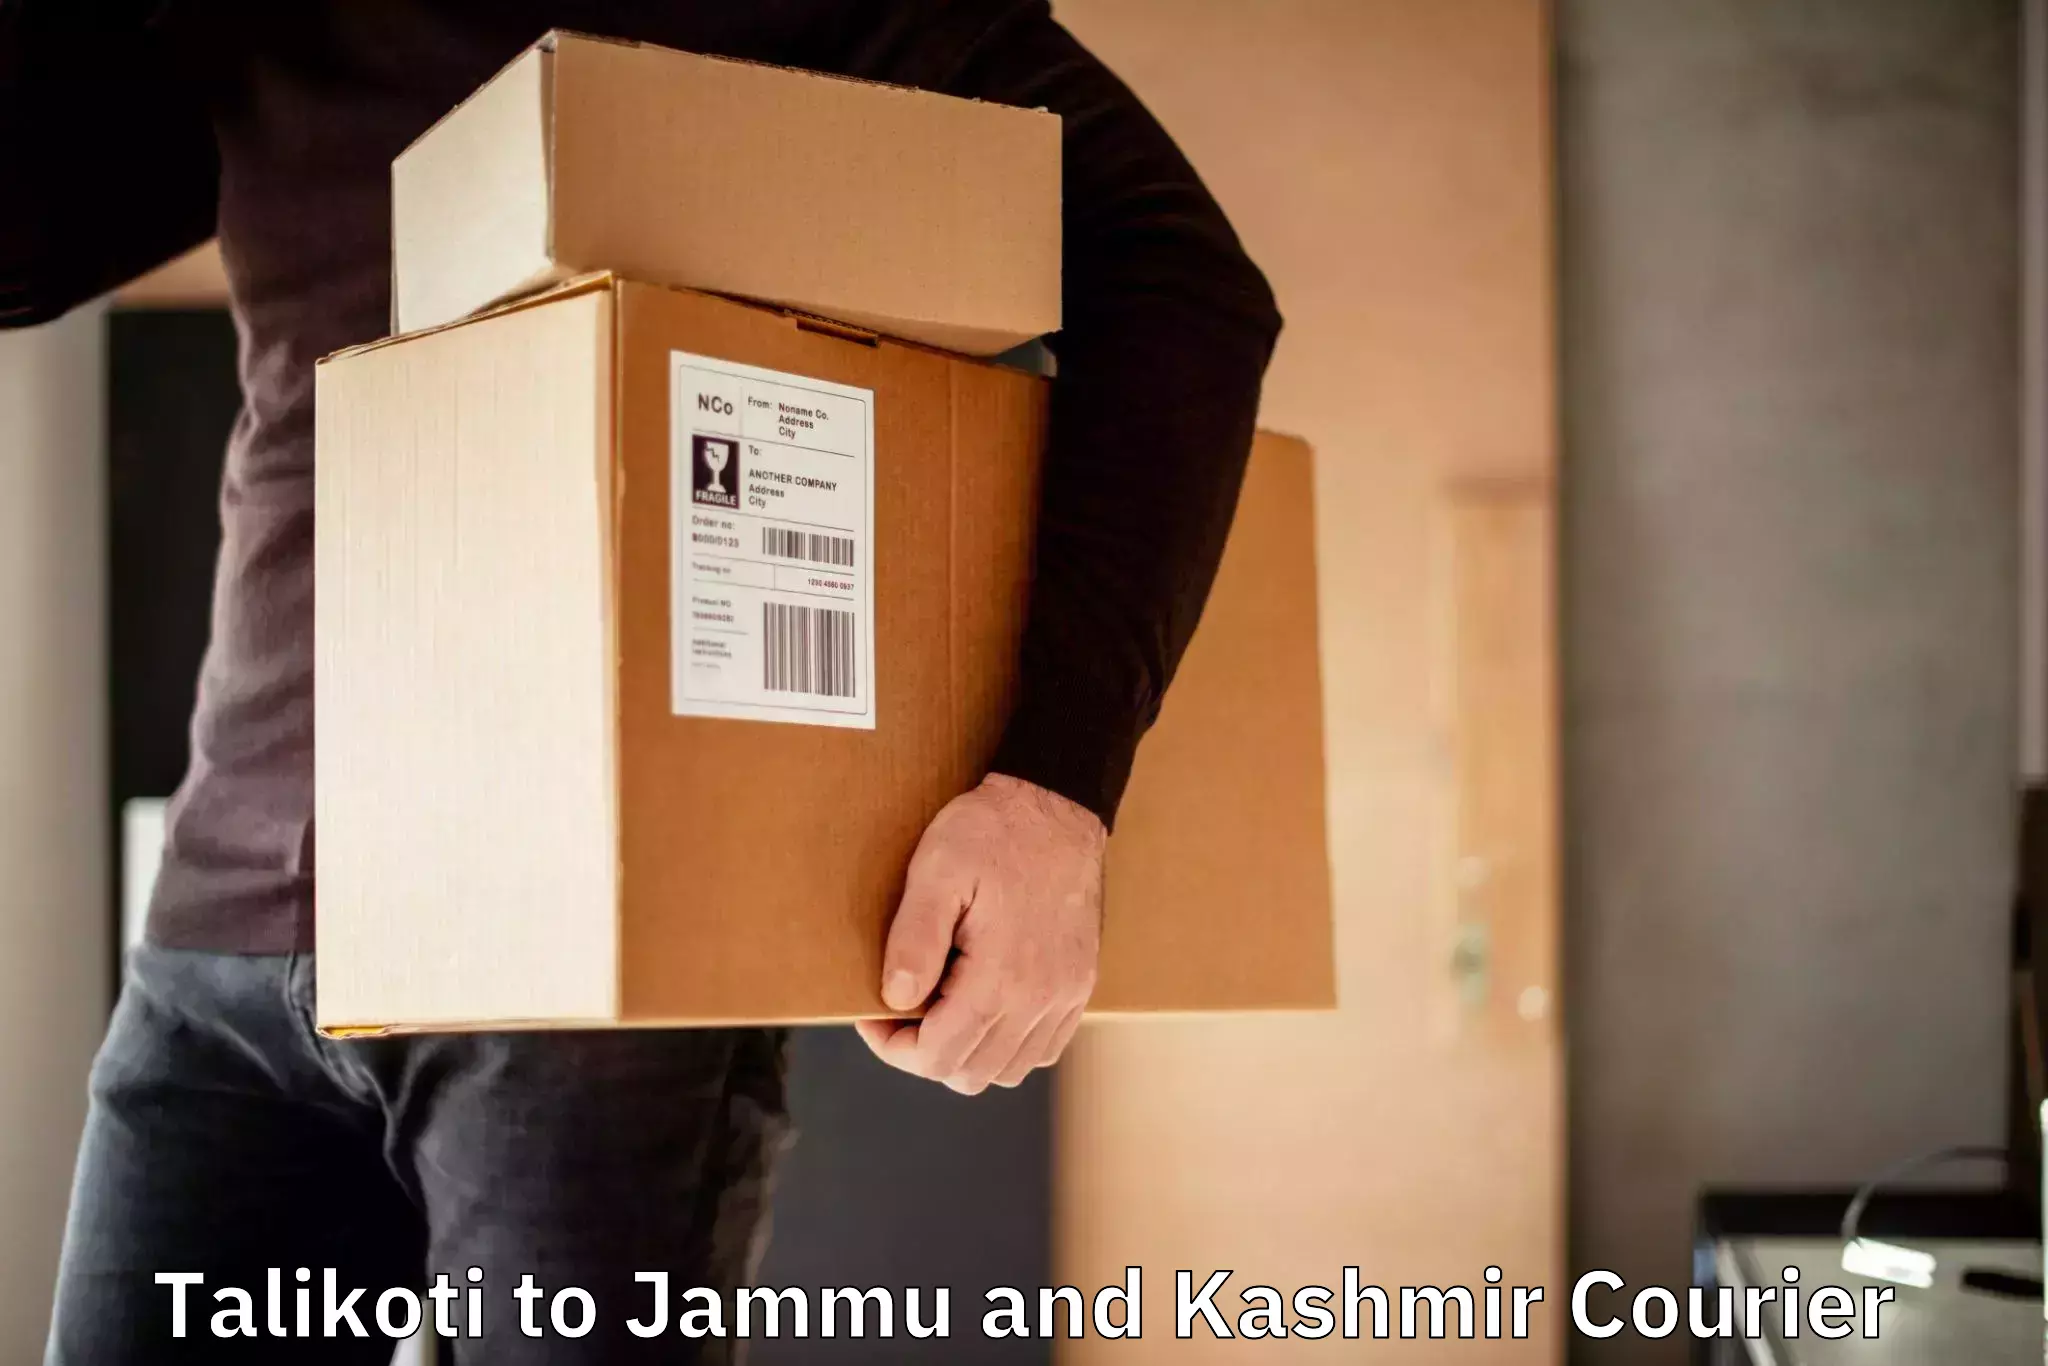 Premium courier solutions Talikoti to Budgam